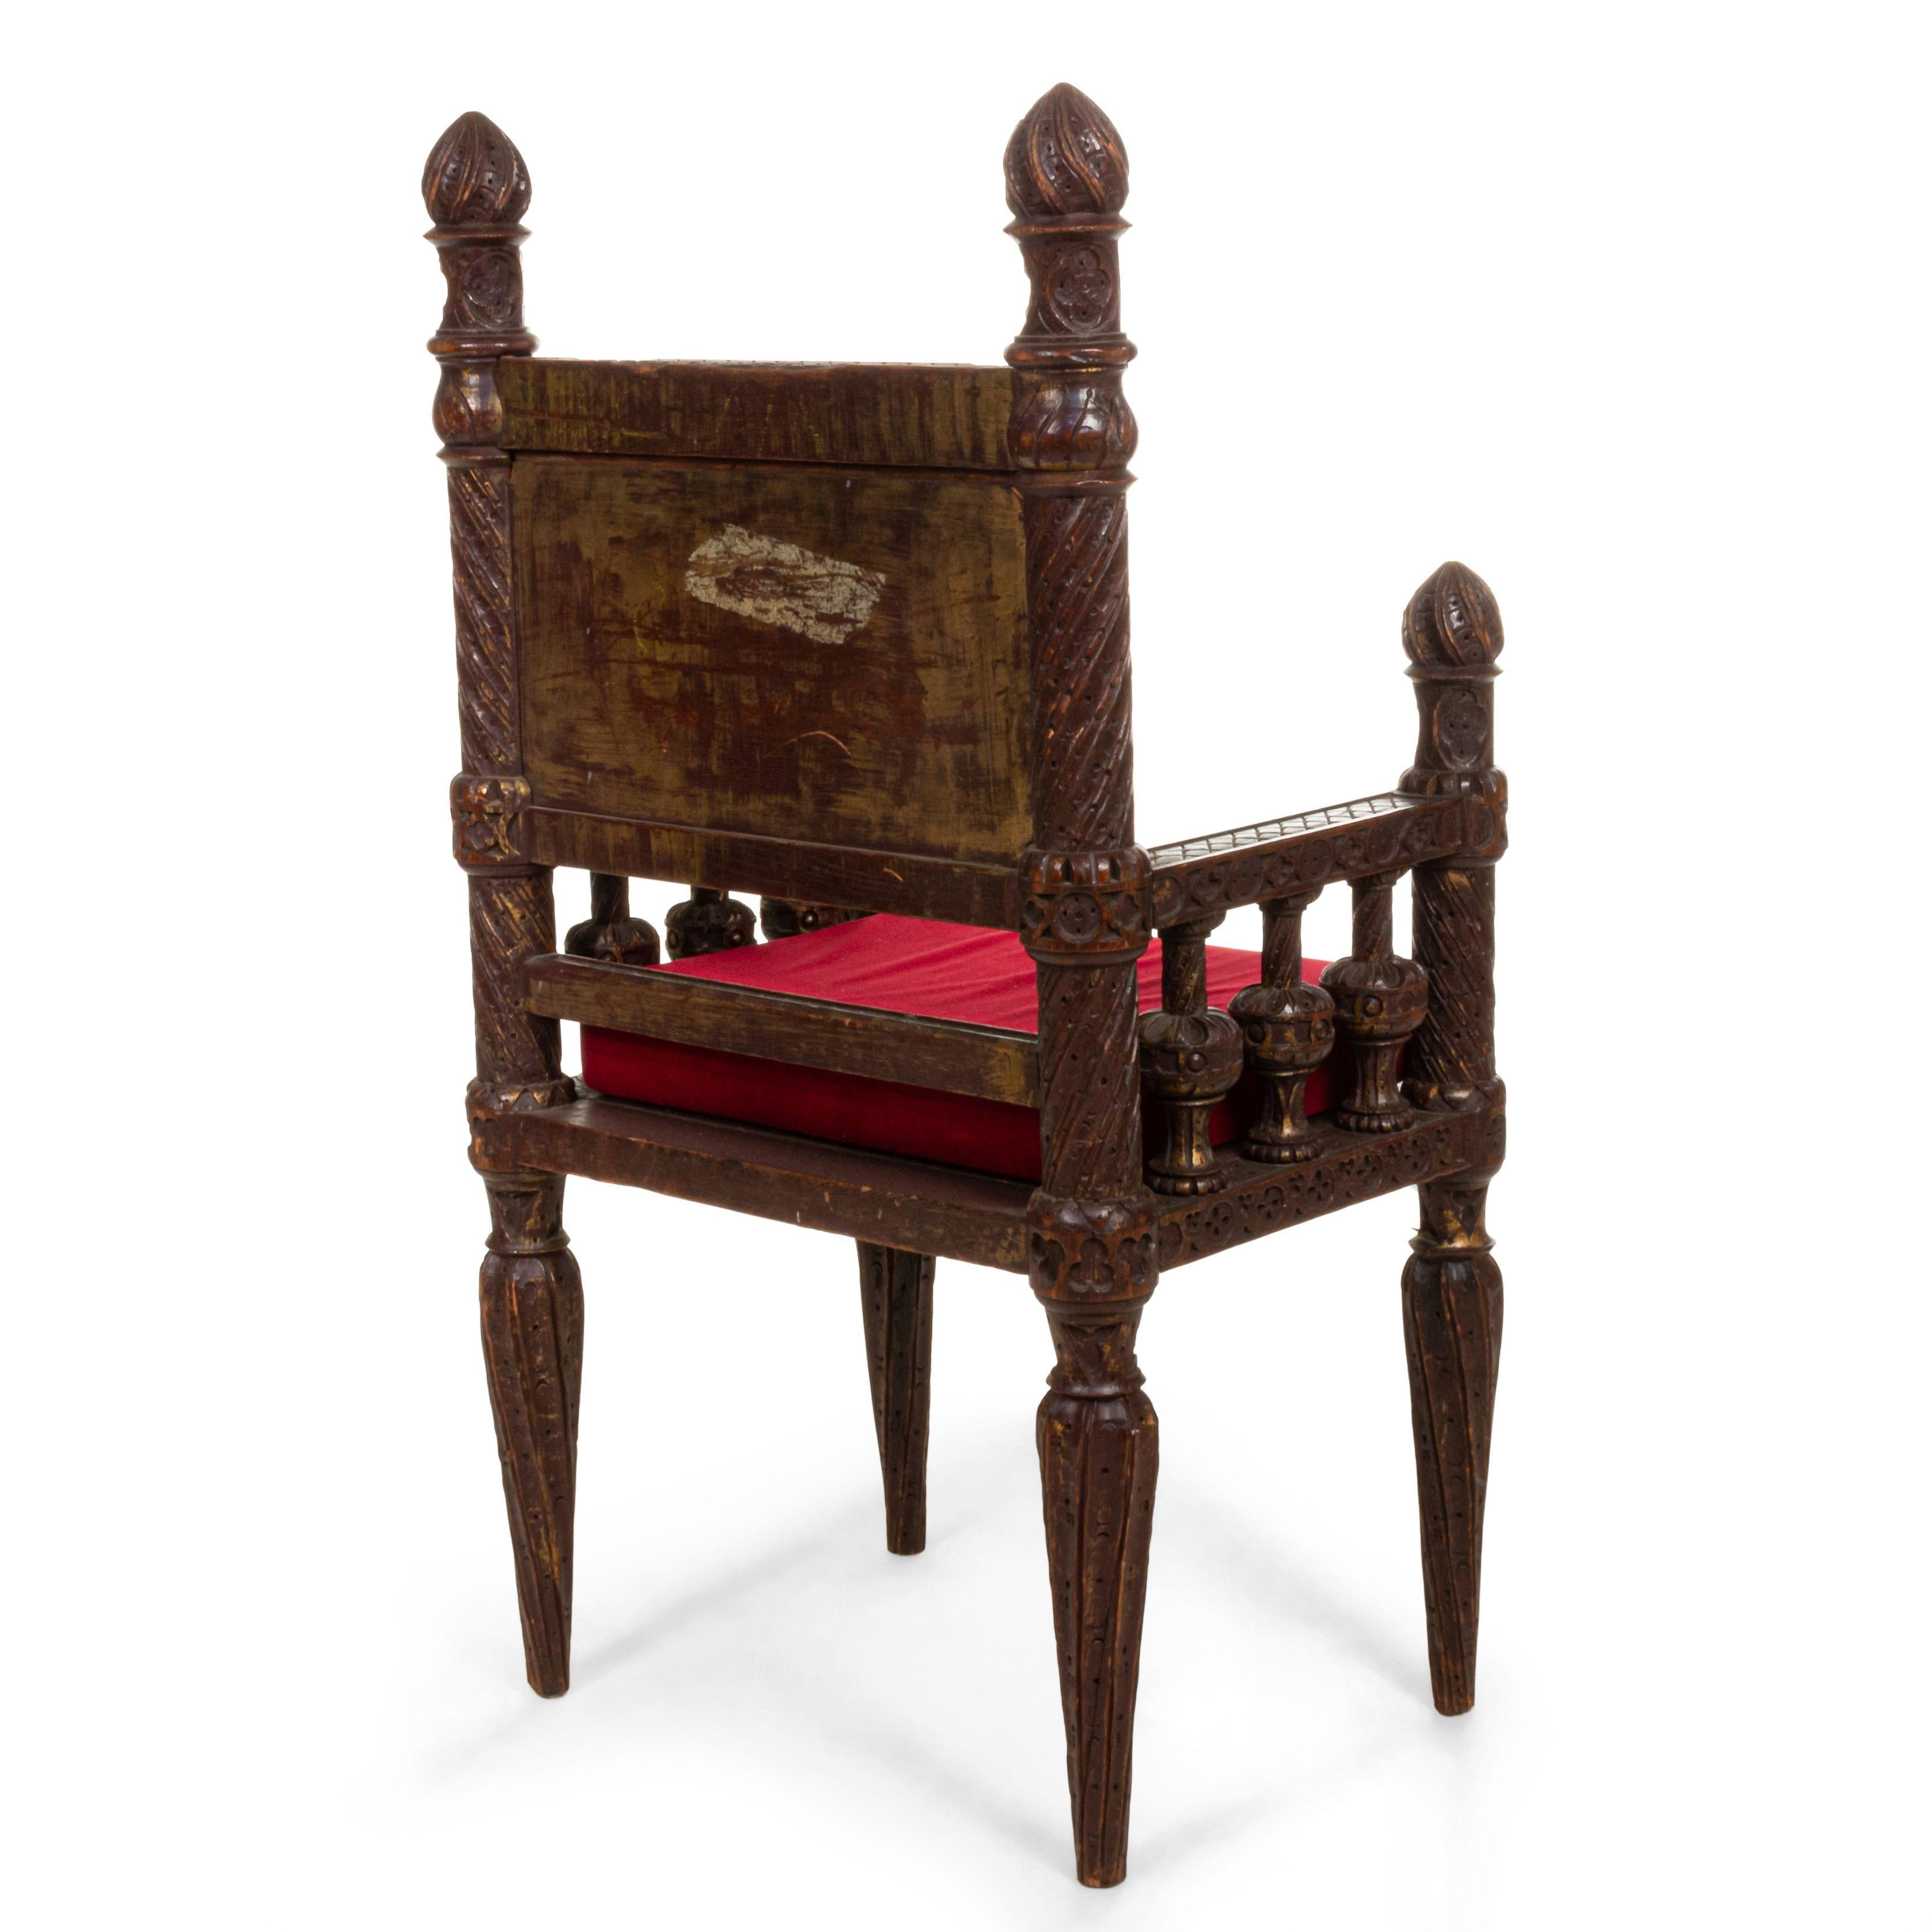 20th Century Gothic Revival Style 19th Century Burgundy Arm Chair For Sale